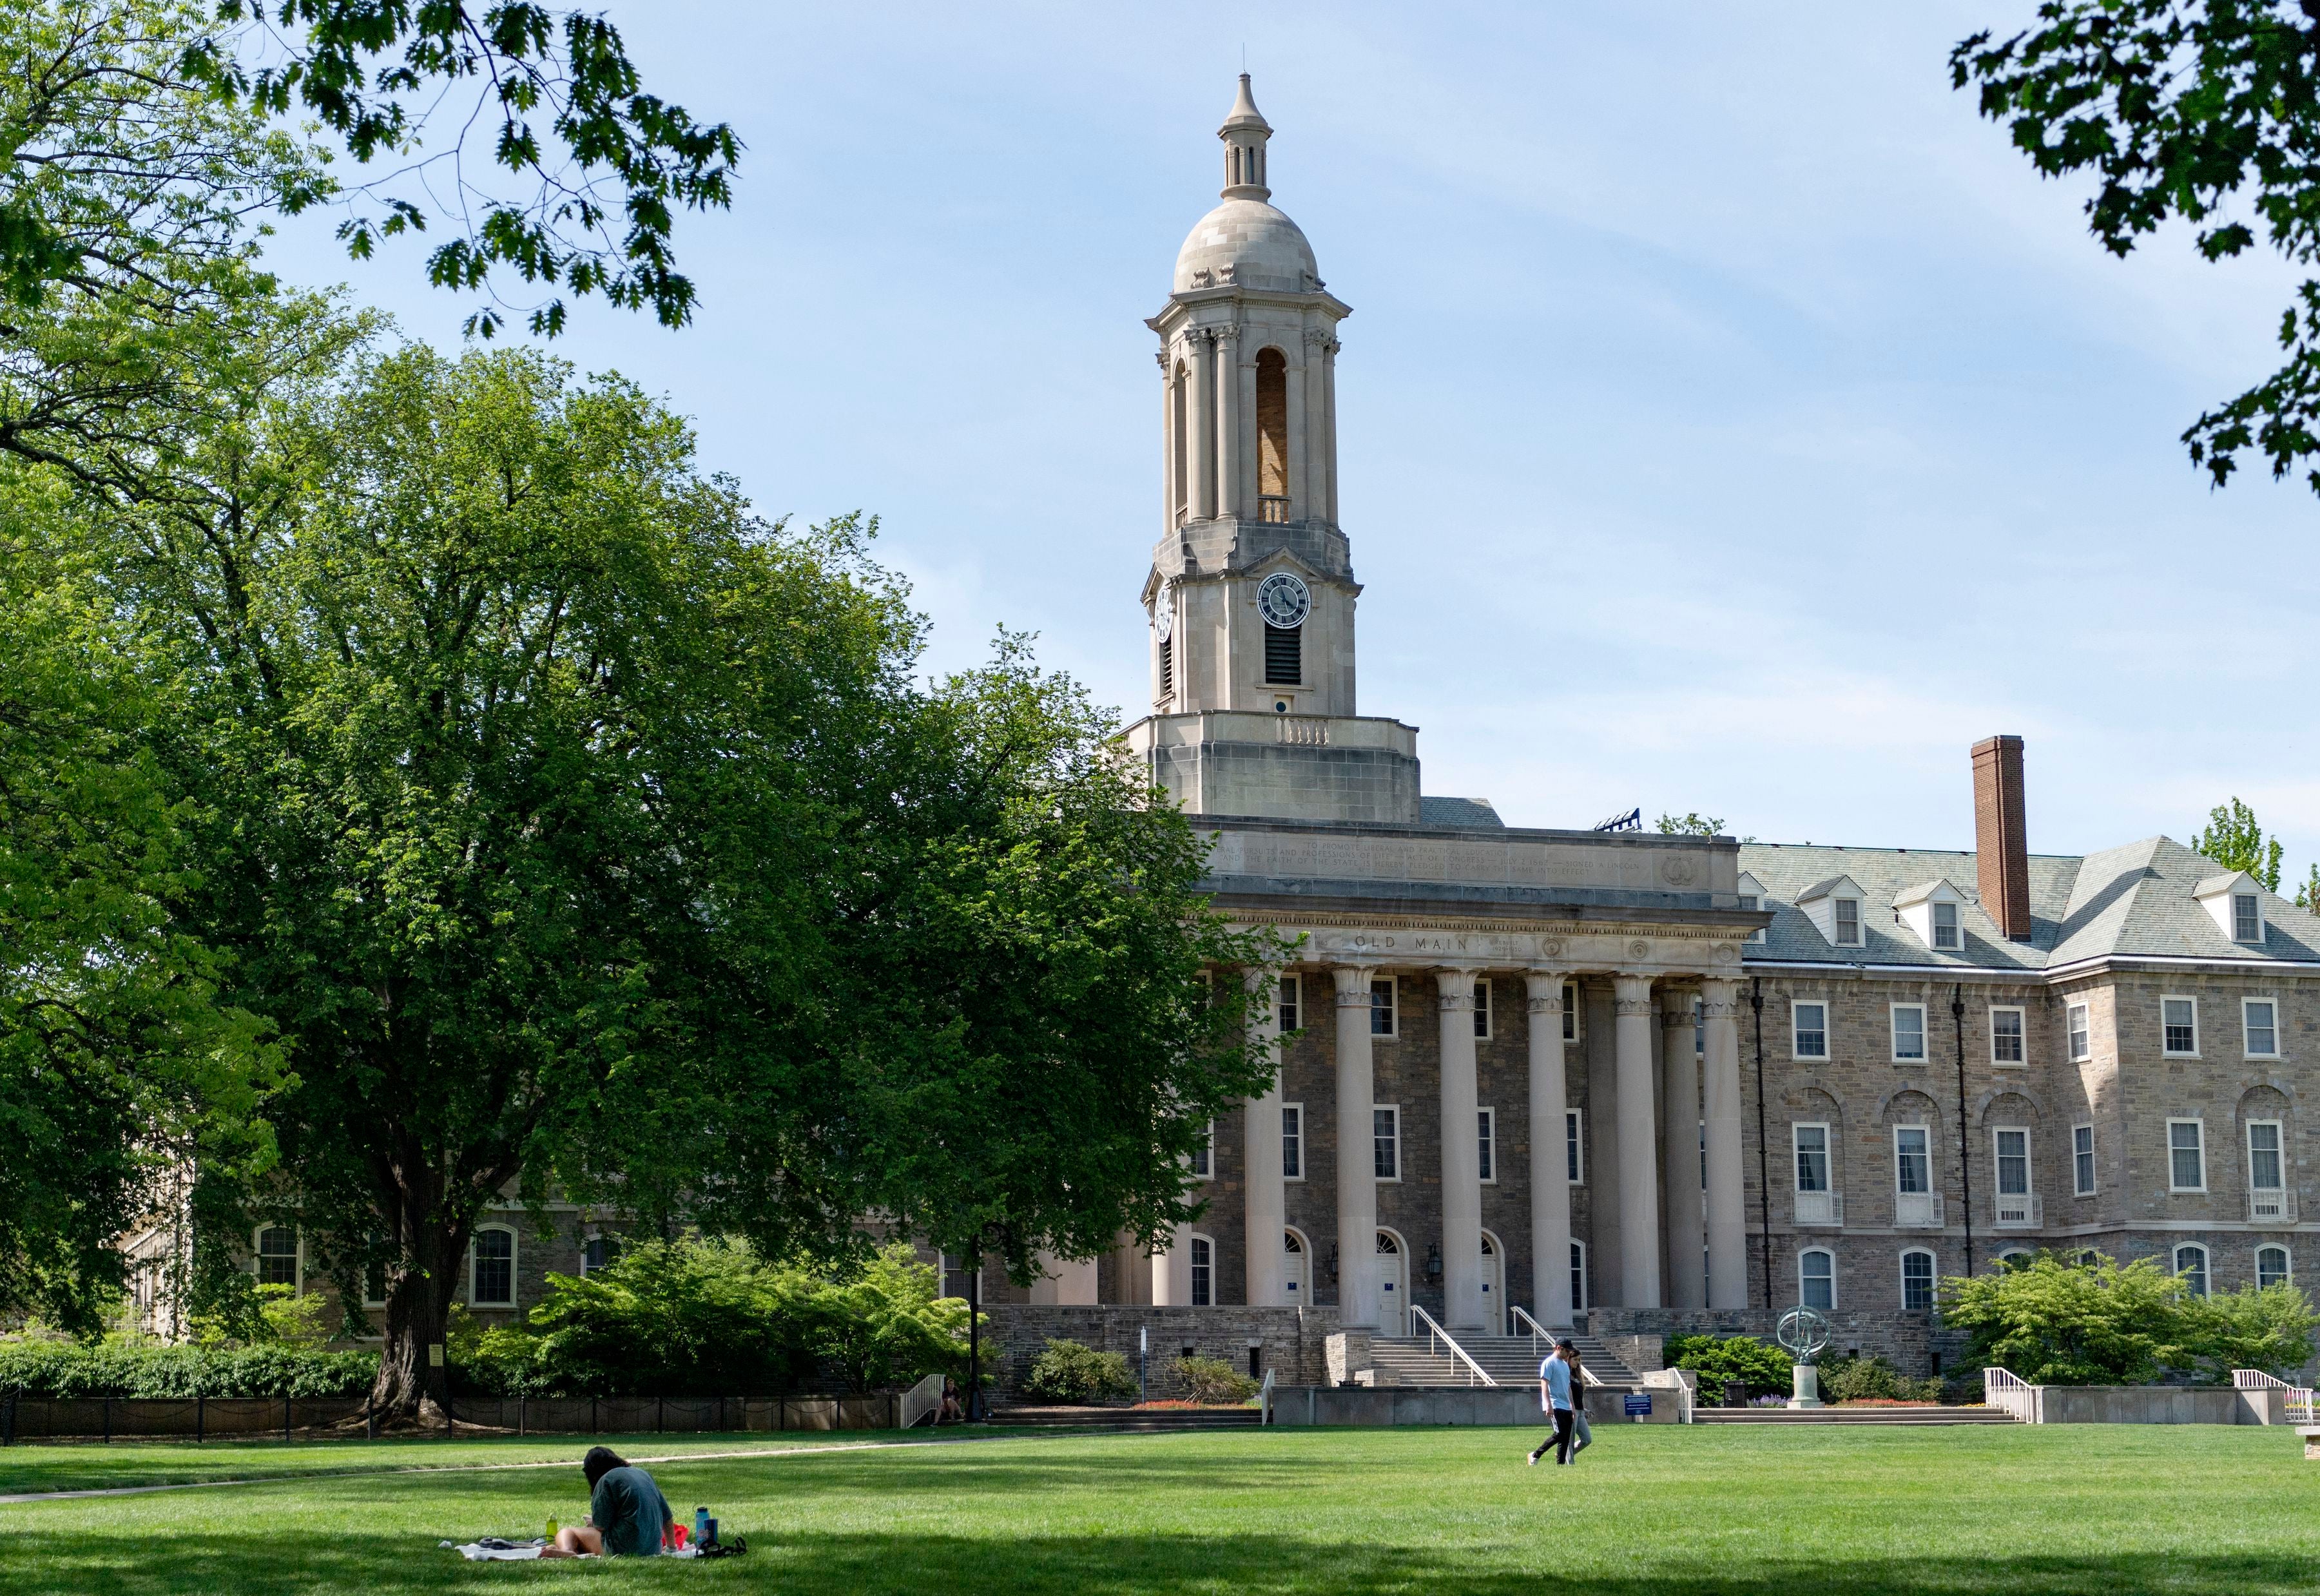 Penn State, Pitt, and others get hundreds of millions in taxpayer funds